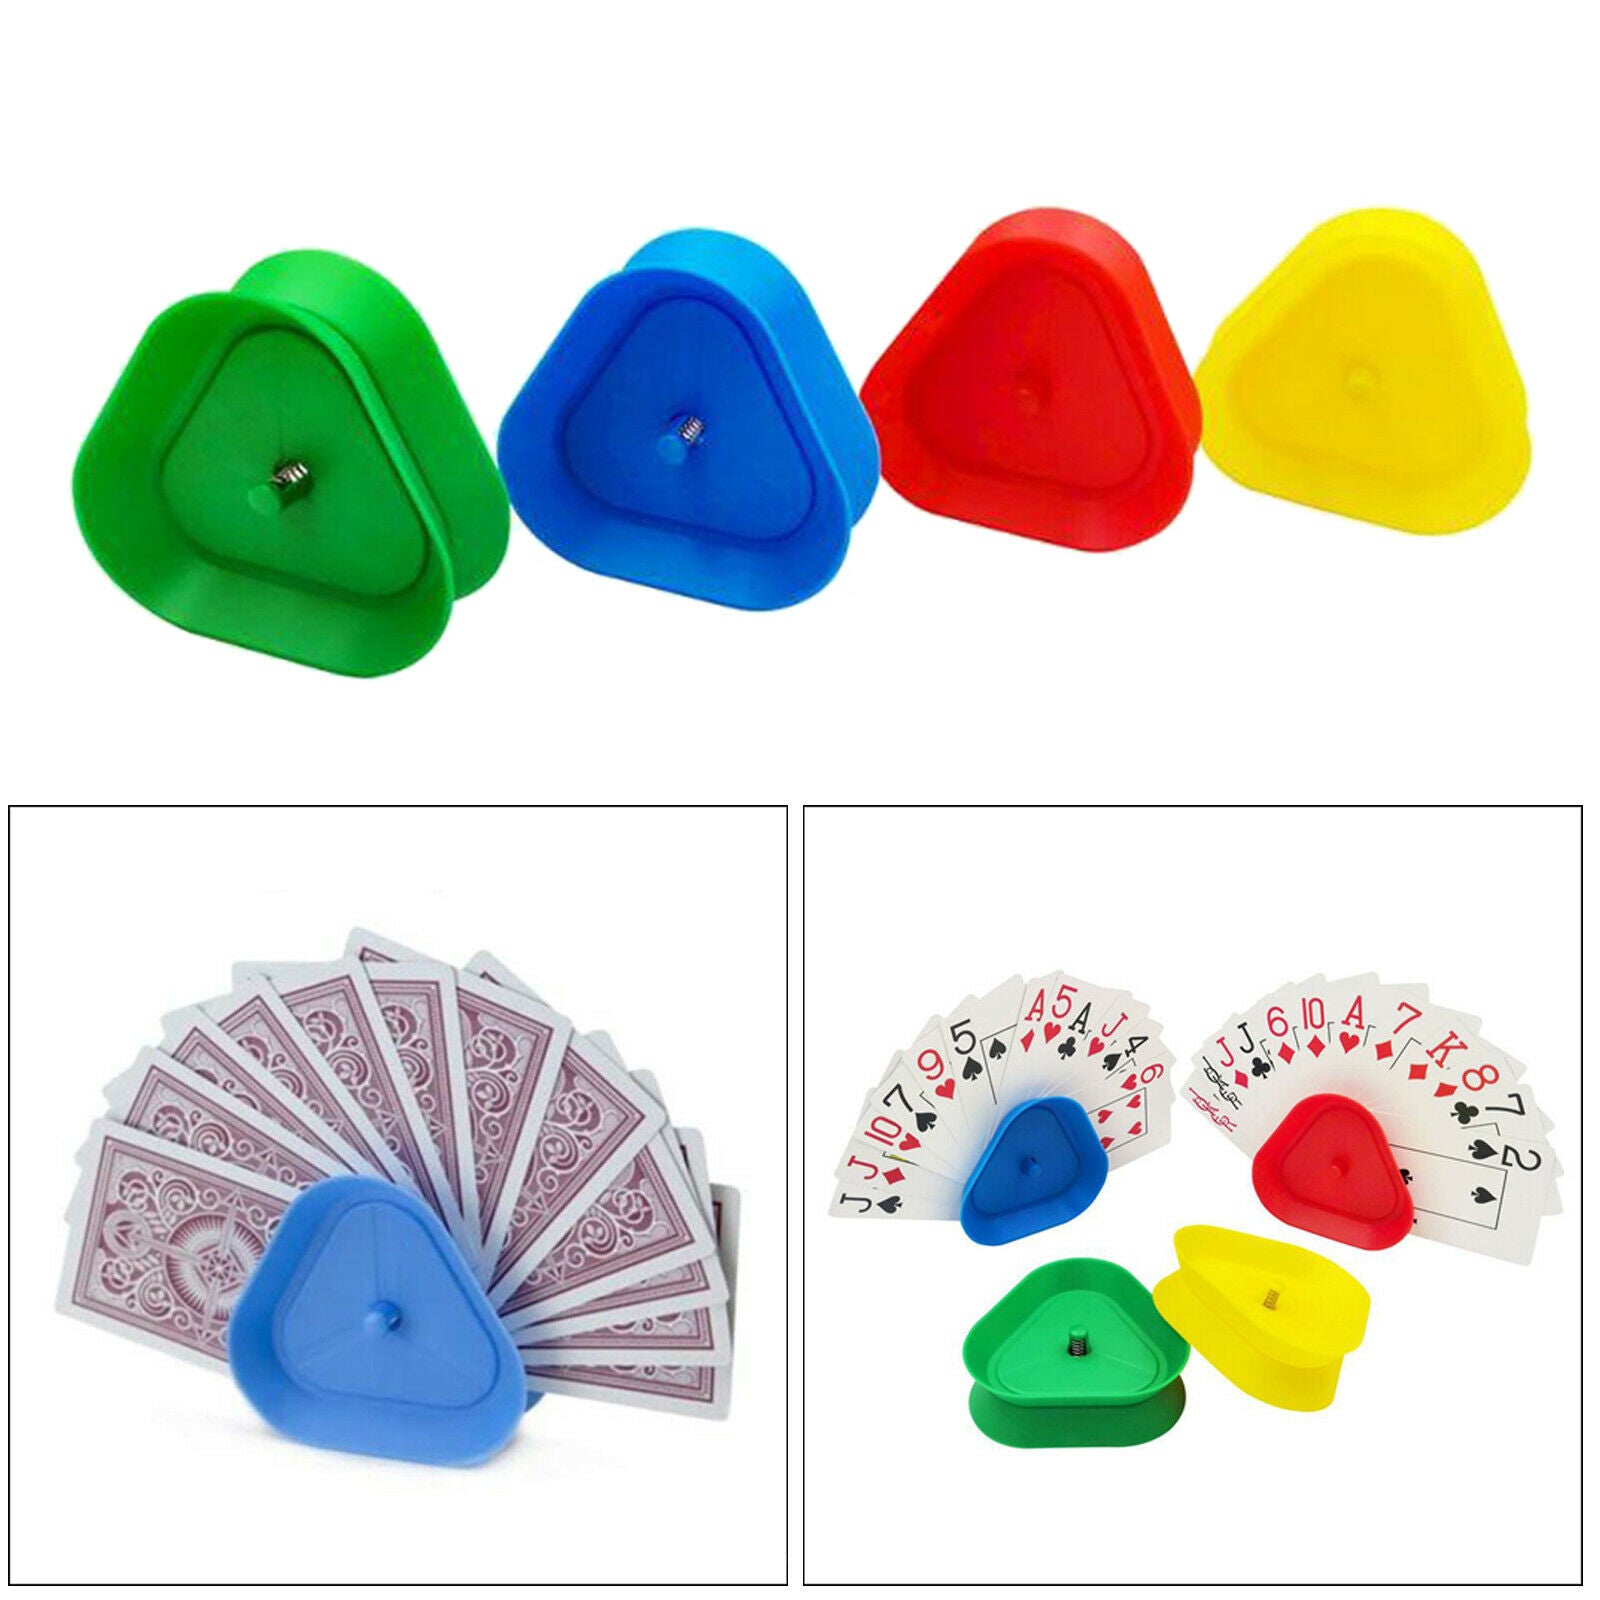 Plastic Hands-Free Playing Card Holder Card Game Accessories for Children